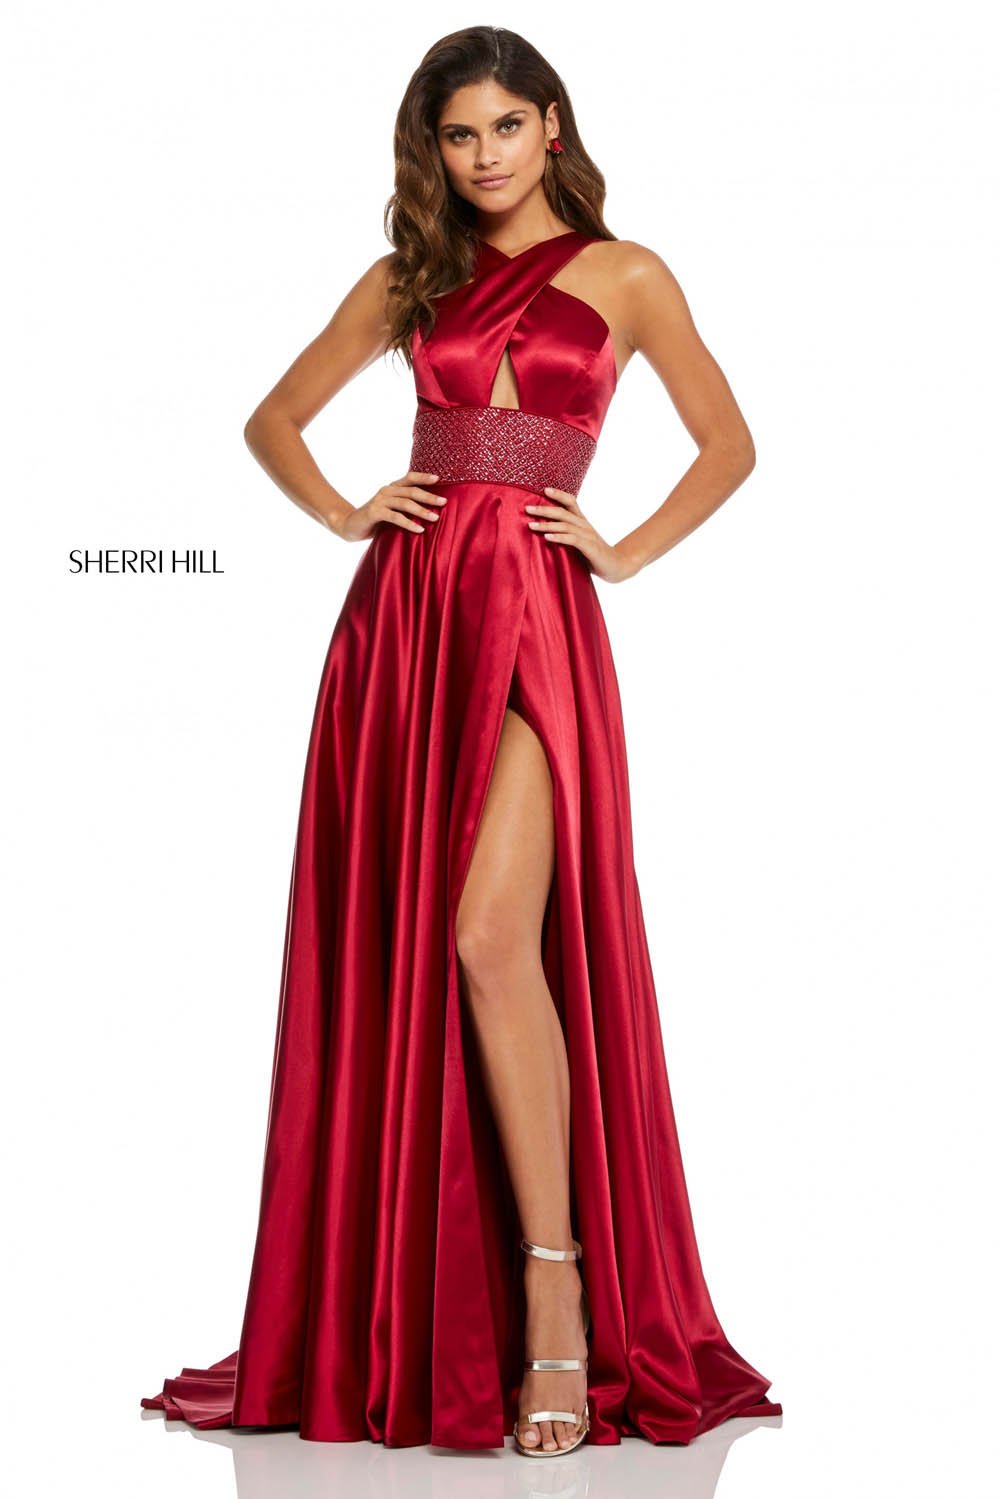 Sherri Hill 52566 dress images in these colors: Red, Royal, Emerald, Wine, Aqua, Lilac.